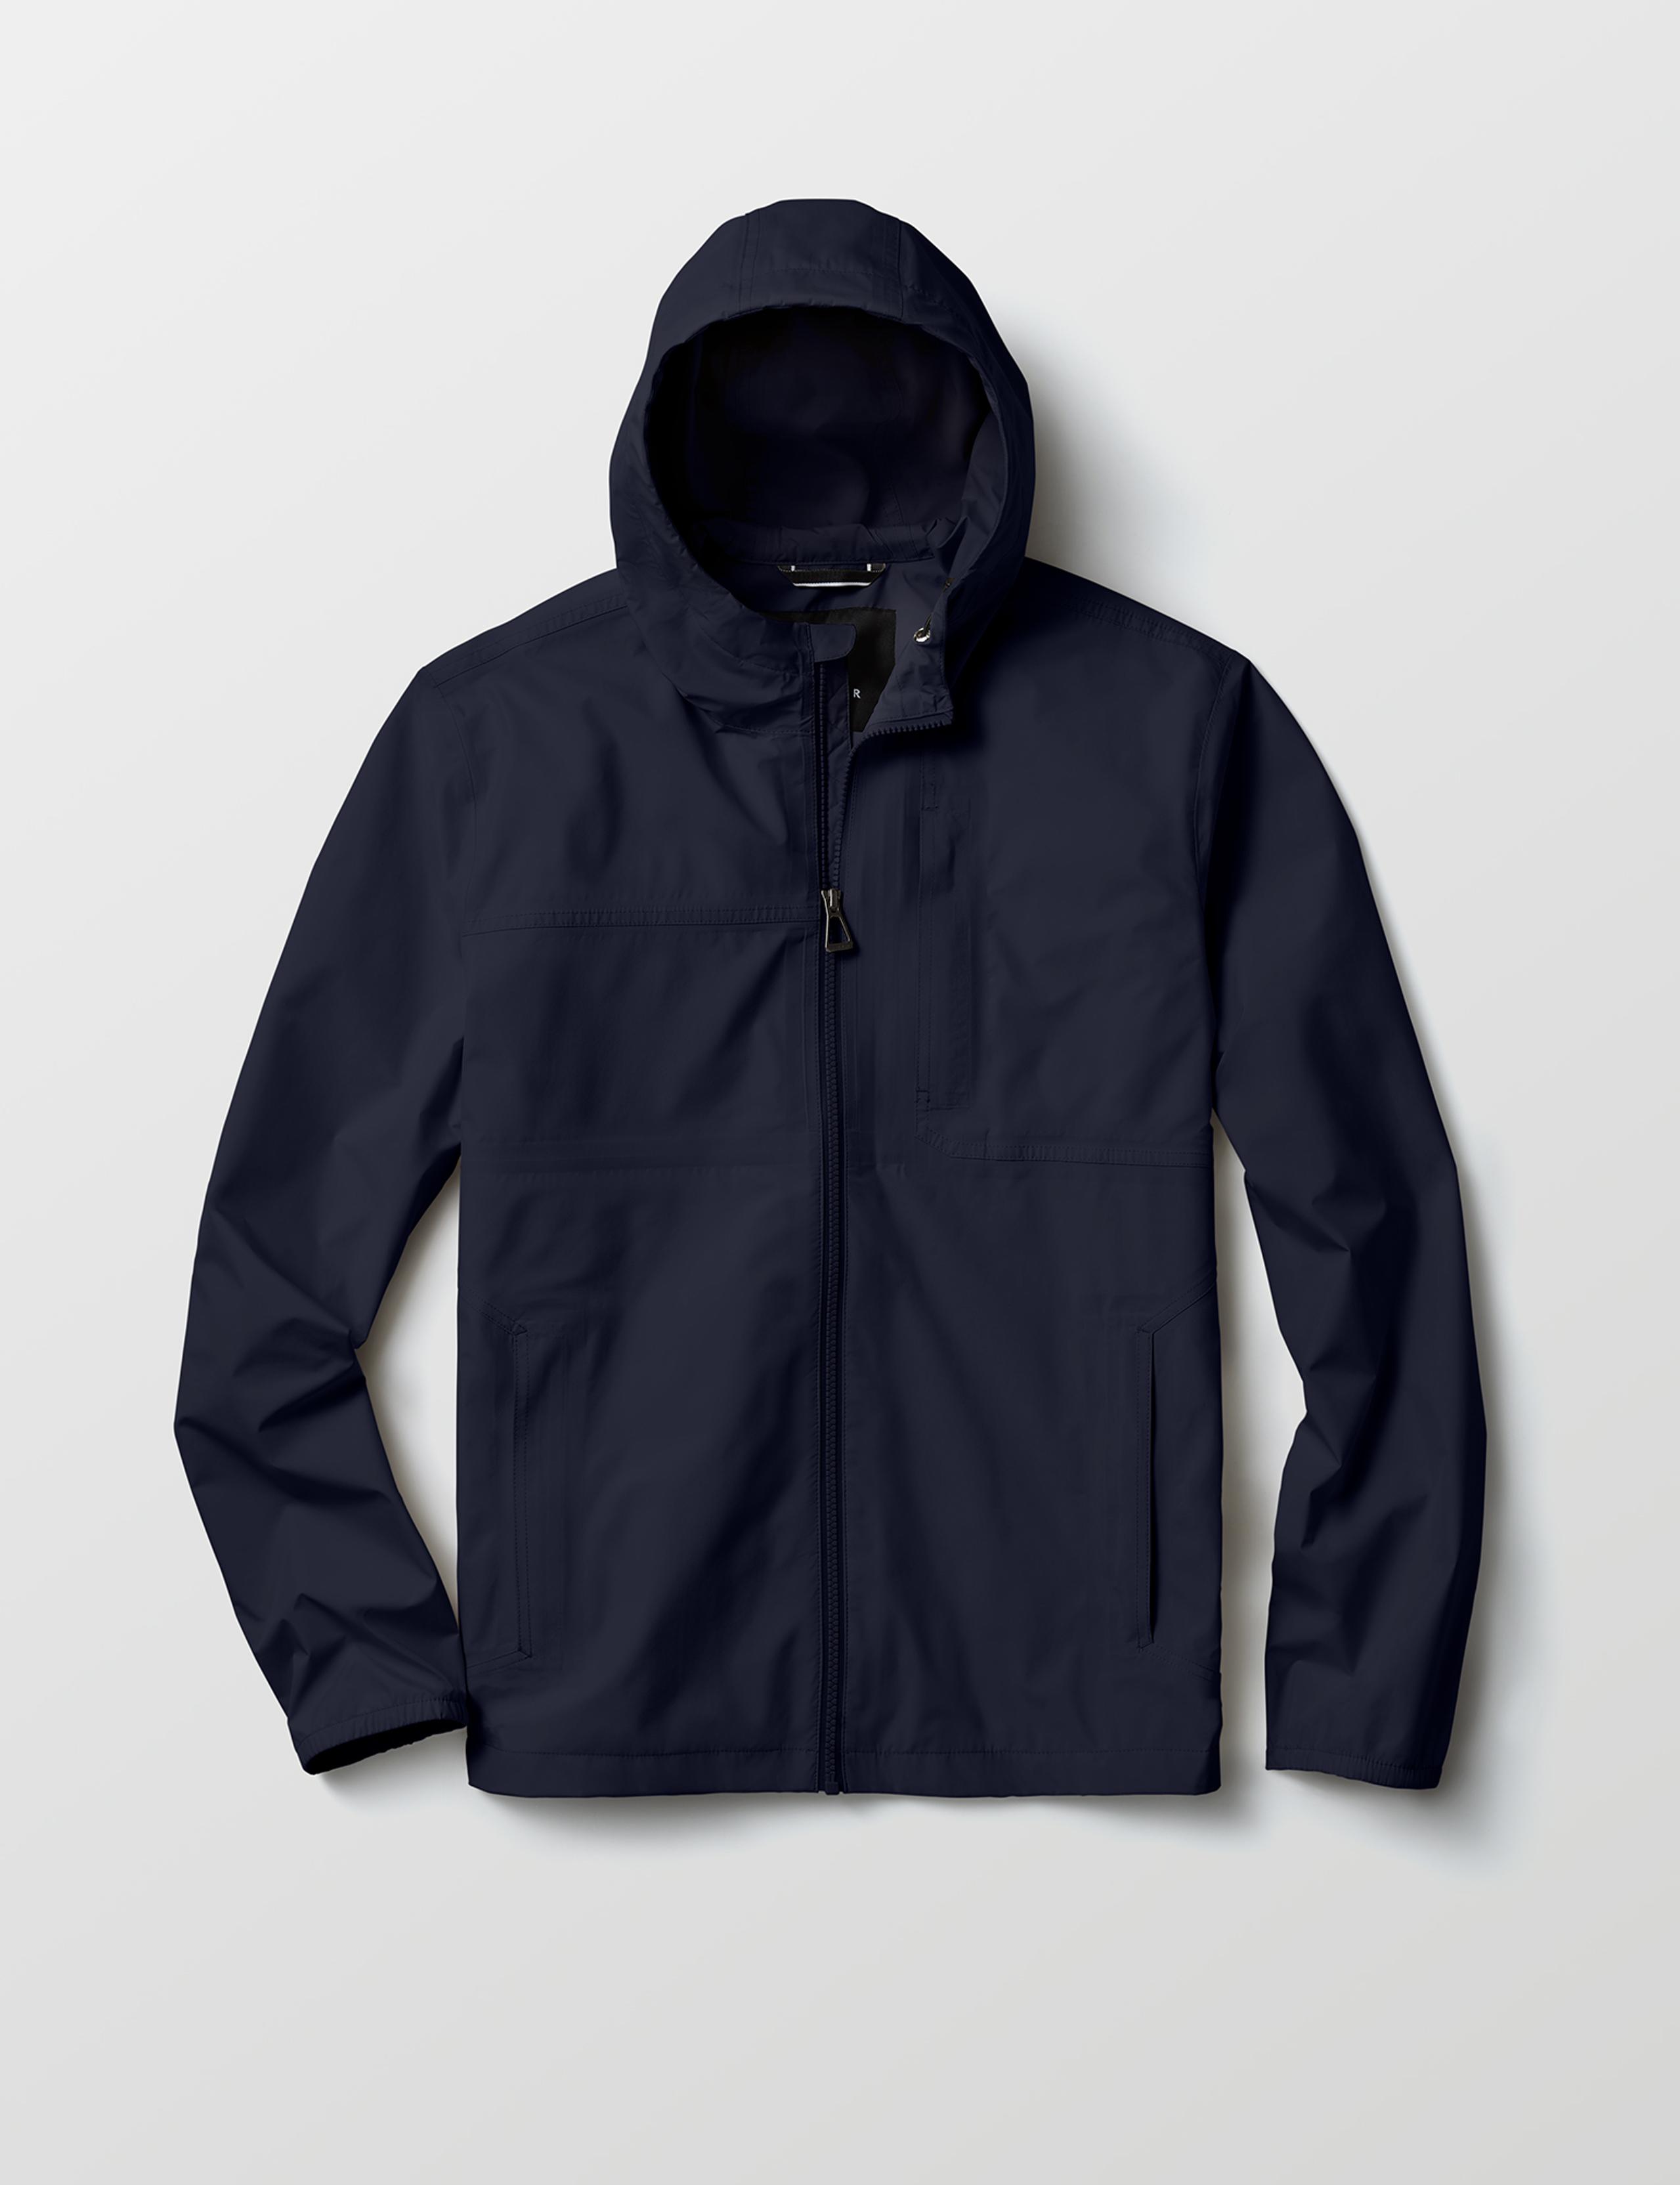 M-Storm All Weather Jacket in Total Eclipse